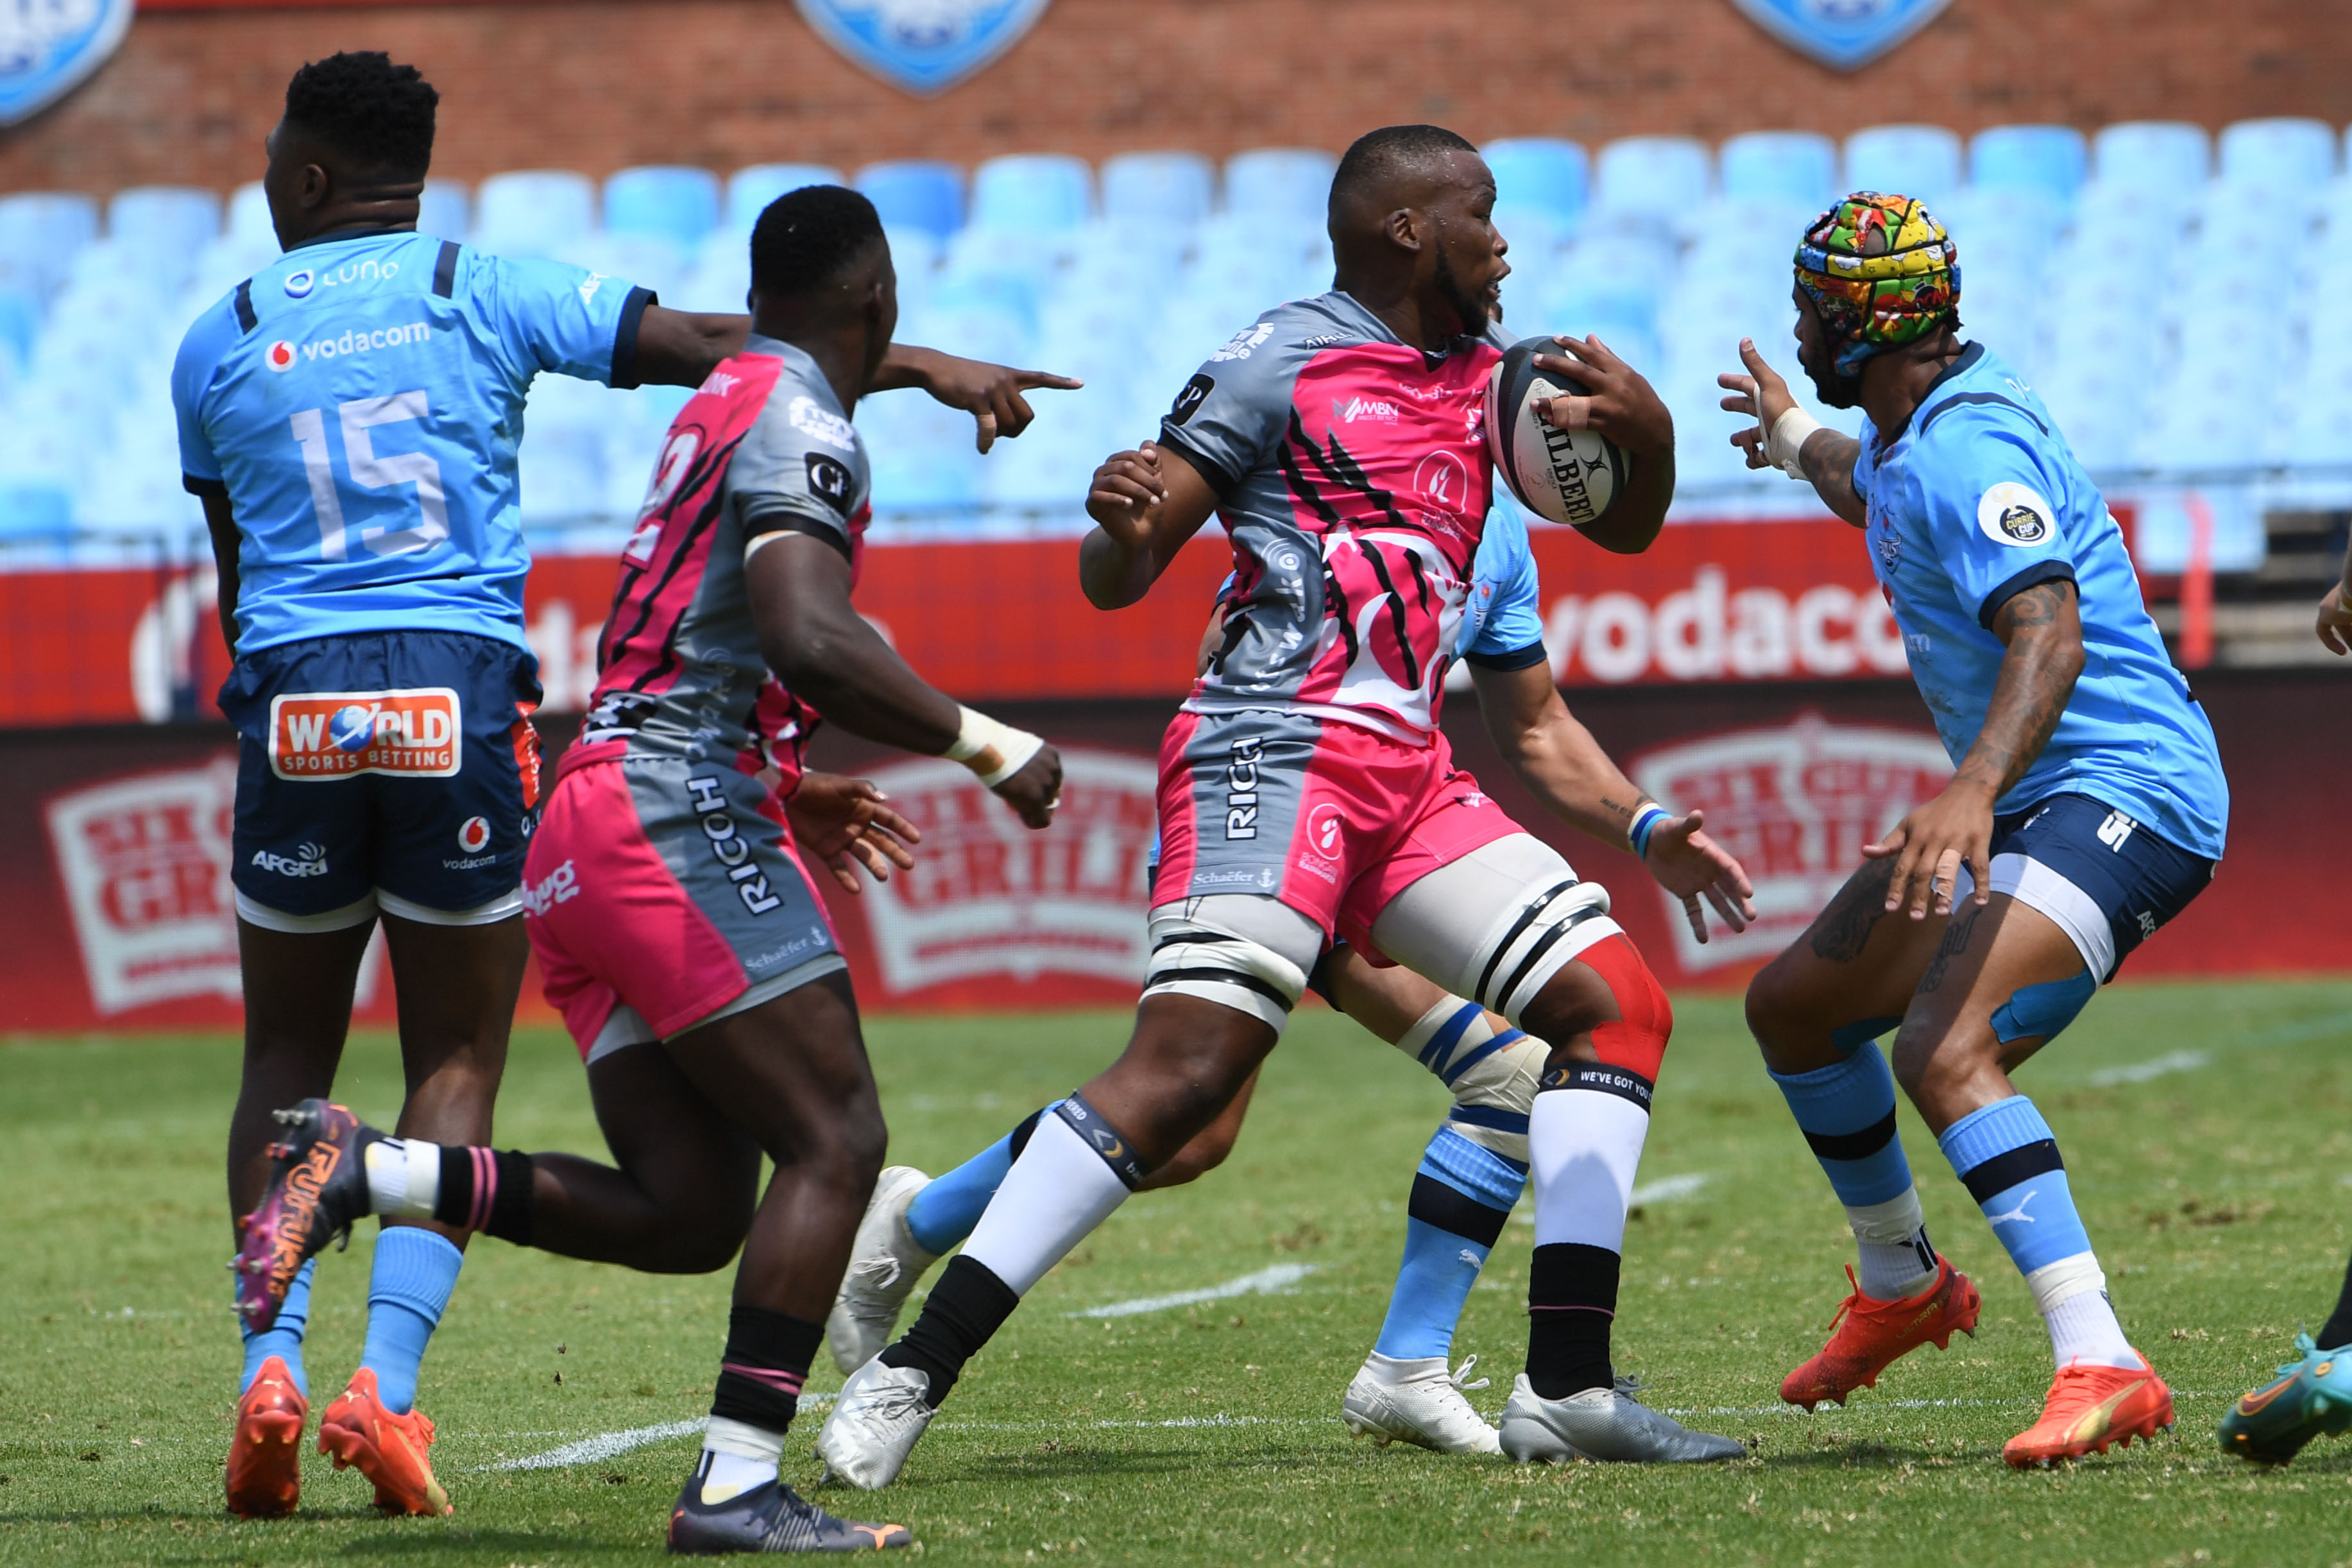 PRETORIA, SOUTH AFRICA - MARCH 12: Kwanda Dimaza of the Pumas during the Currie Cup, Premier Division match between Vodacom Bulls and Airlink Pumas at Loftus Versfeld on March 12, 2023 in Pretoria, South Africa. (Photo by Lee Warren/Gallo Images)